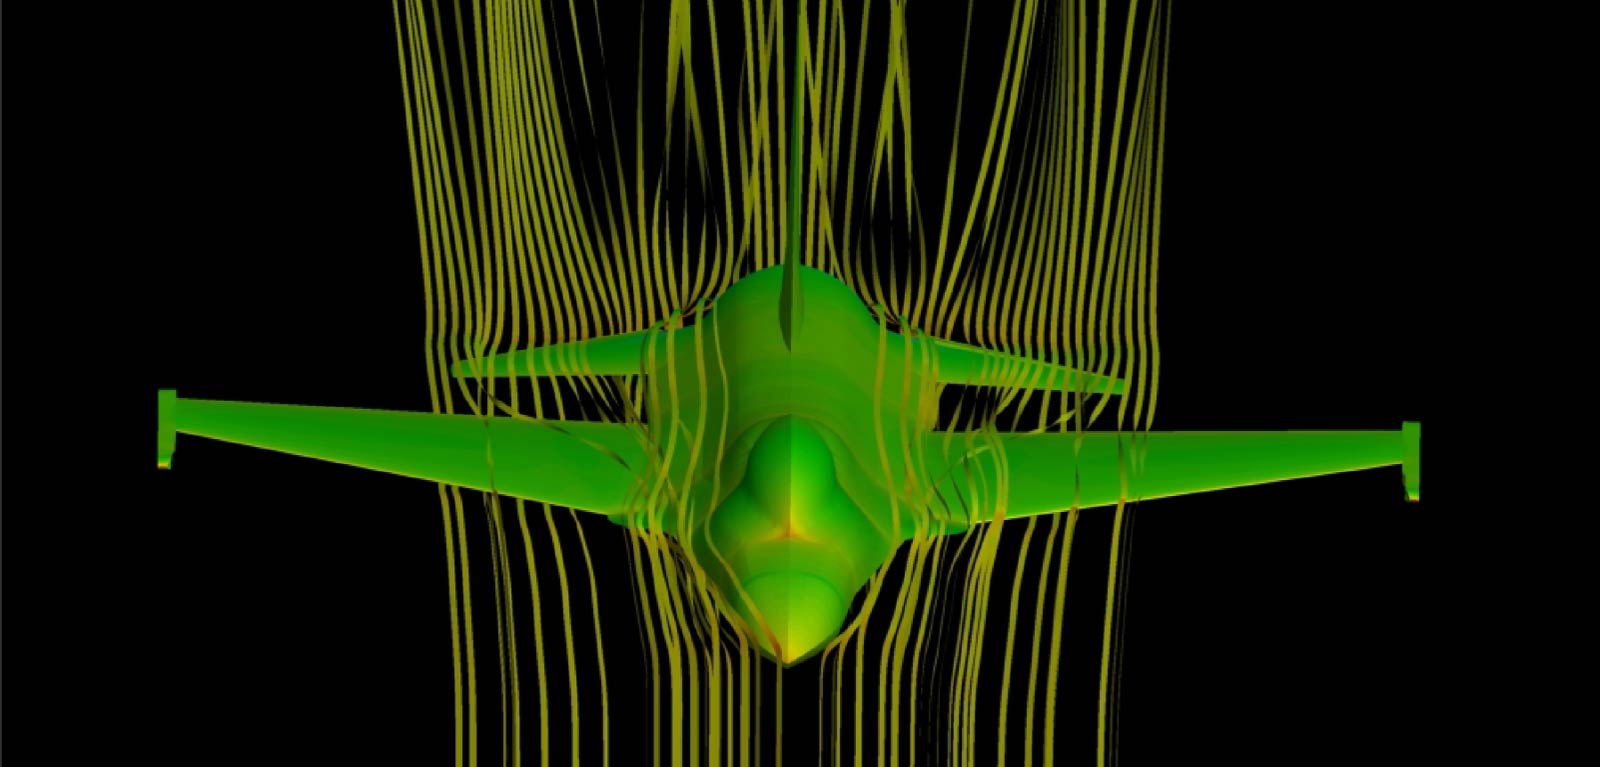 CFD simulation of a fighter aircraft with visible jetstreams